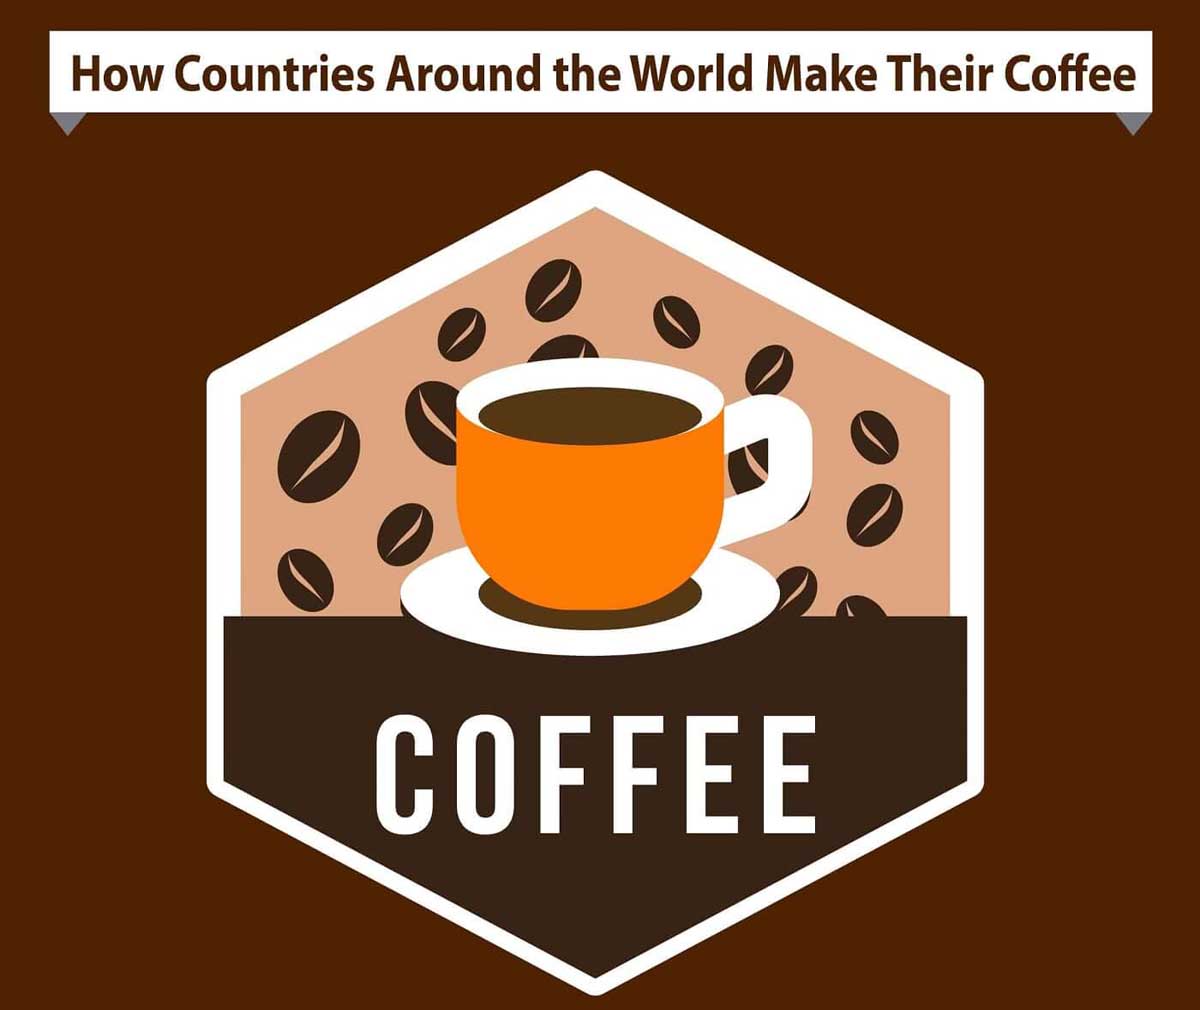 How Countries Around the World Make Their Coffee